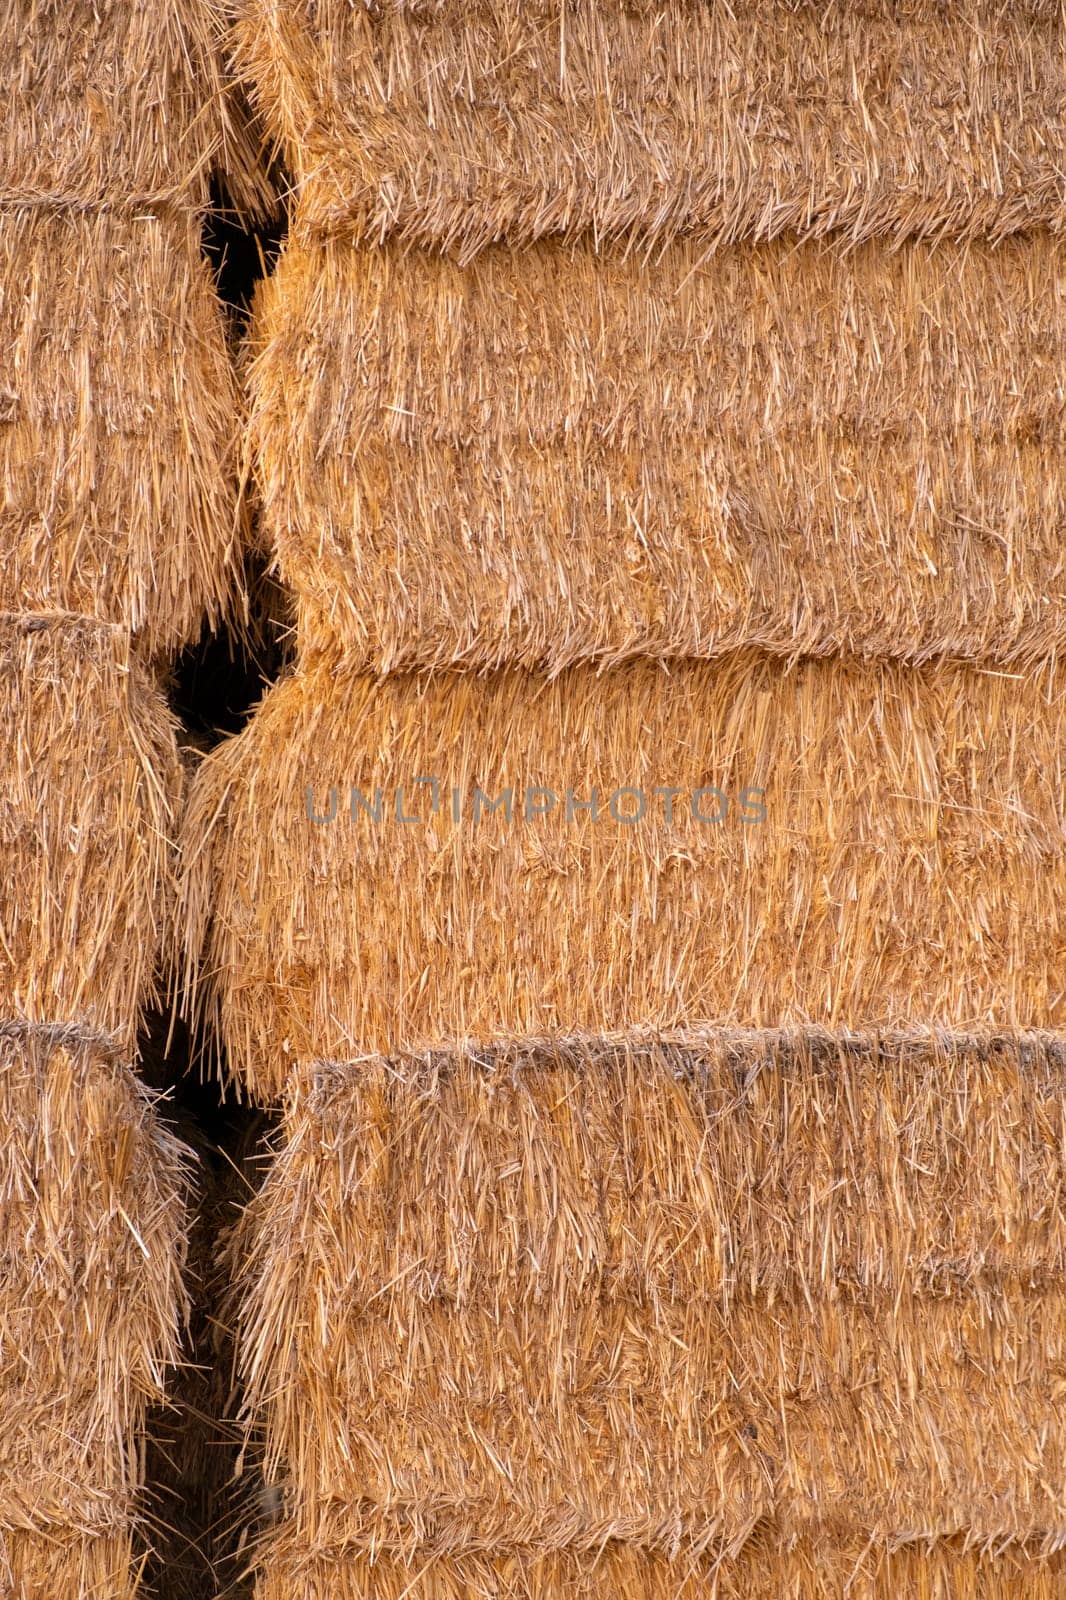 Stack of yellow hay straw bales for background. Concept farm agriculture harvest of alfalfa haybales. High quality verticle photo.